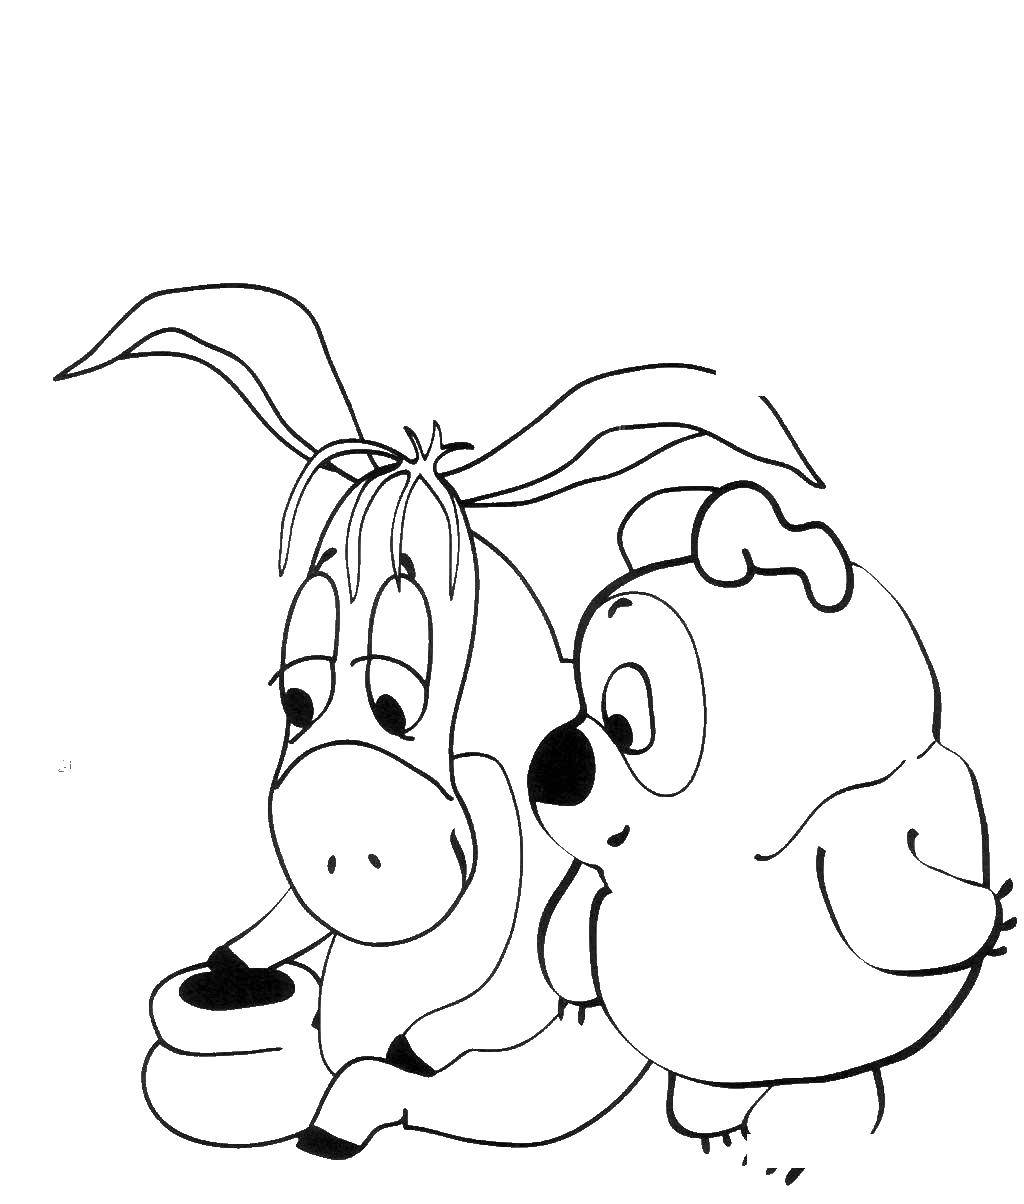 Coloring Winnie the Pooh and Eeyore. Category Soviet coloring. Tags:  Decorate.